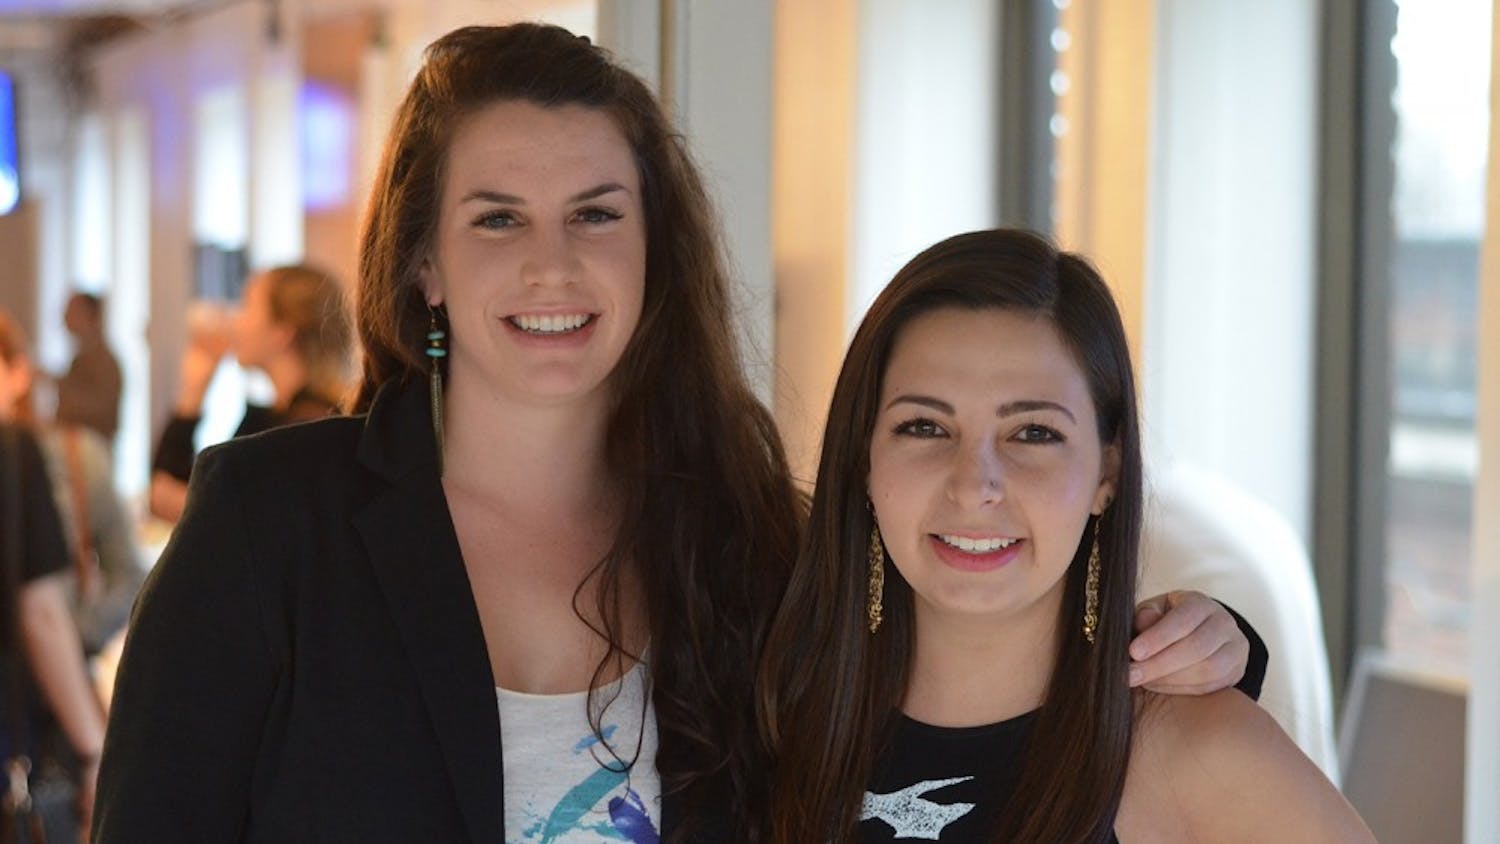 Lisa Myers and Natalia Gonzalez, artistic director and founder of Artwear Designs, launched their new clothing line in 1789 Venture Lab on Friday, March 28. 